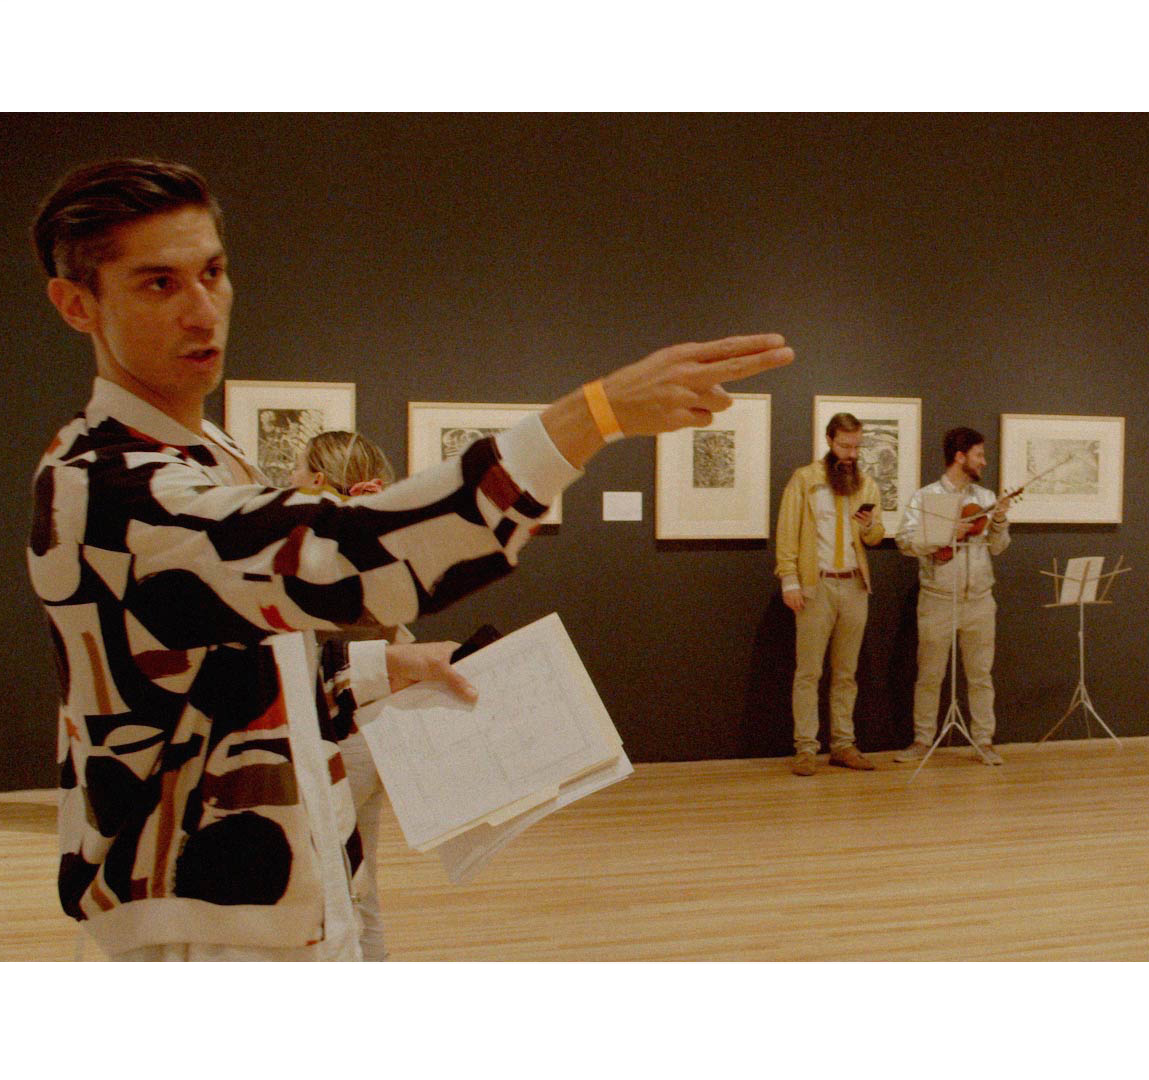 A man with short, dark hair wearing a bomber jacket with bold, geometric patterns, gestures with his arm. He stands in an art gallery with framed artworks on the wall behind him.